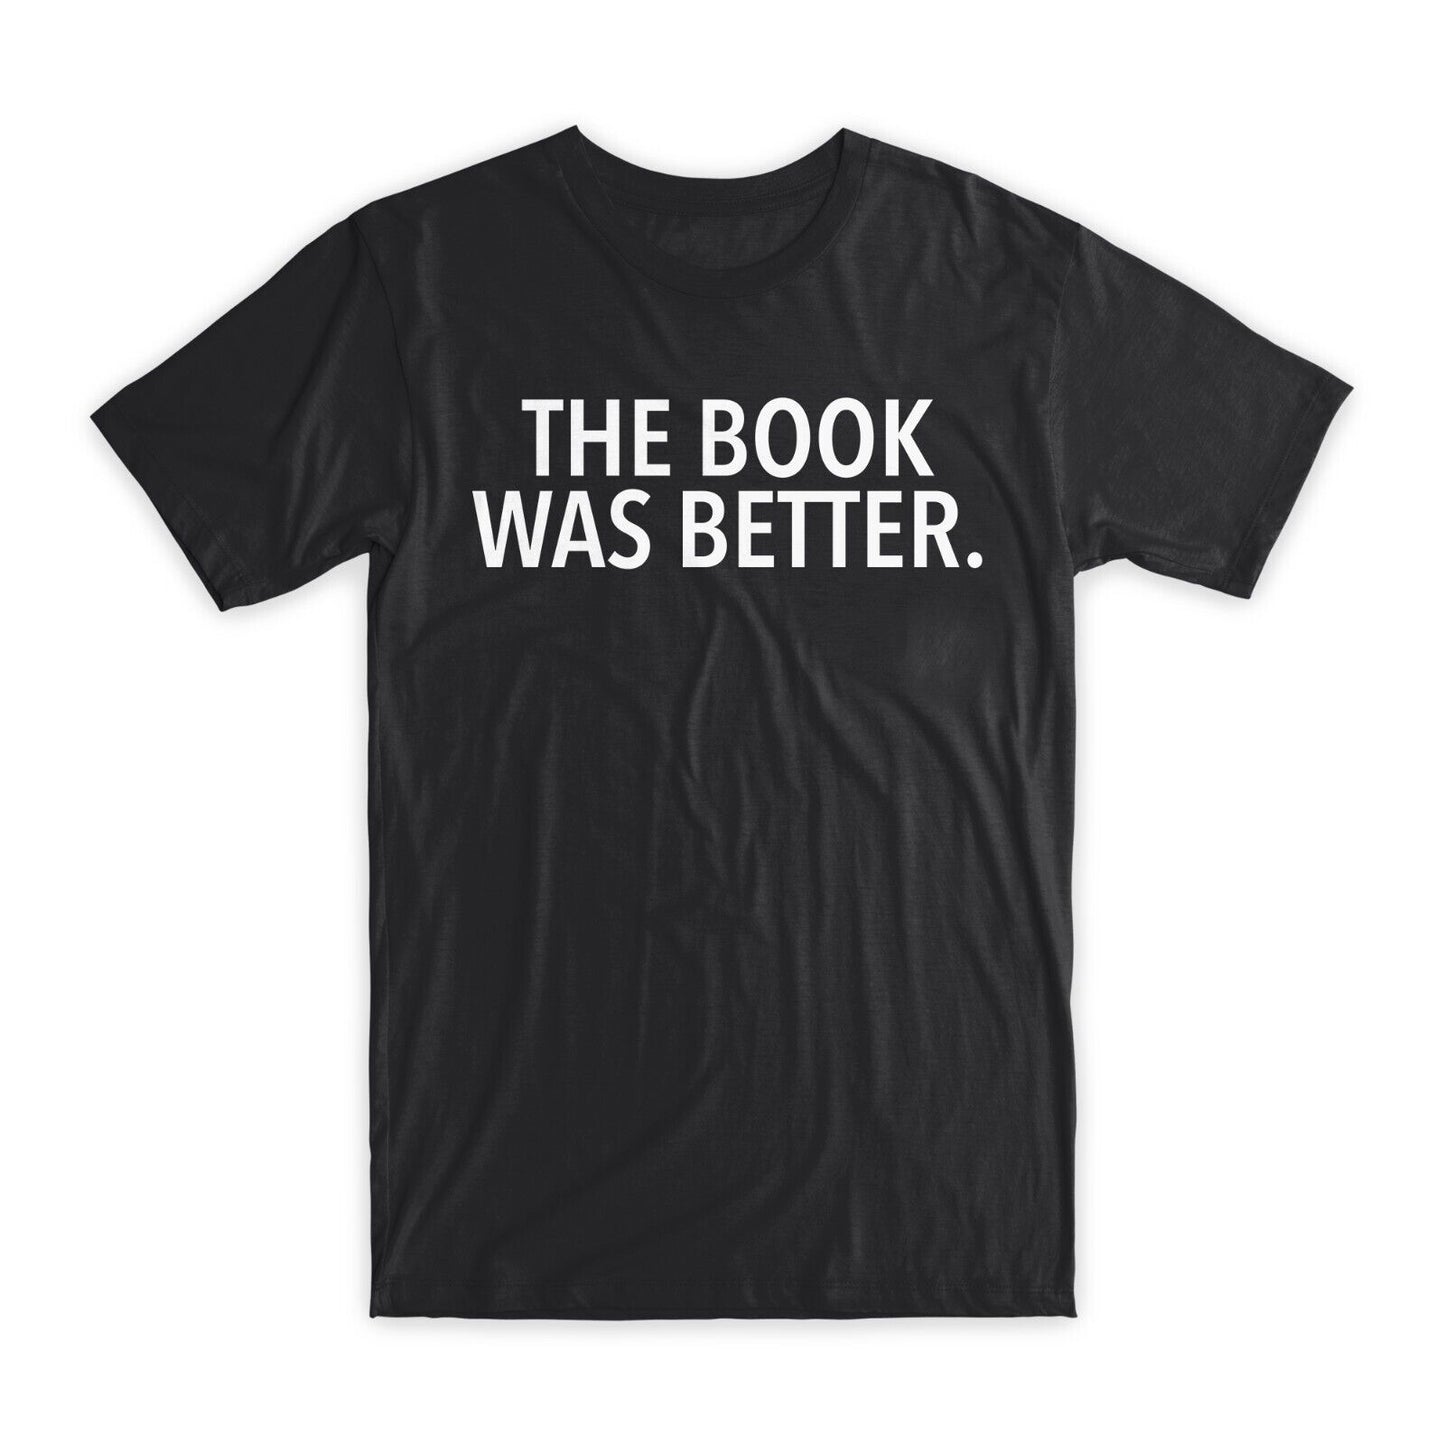 The Book Was Better T-Shirt Premium Soft Cotton Crew Neck Funny Tees Gifts NEW